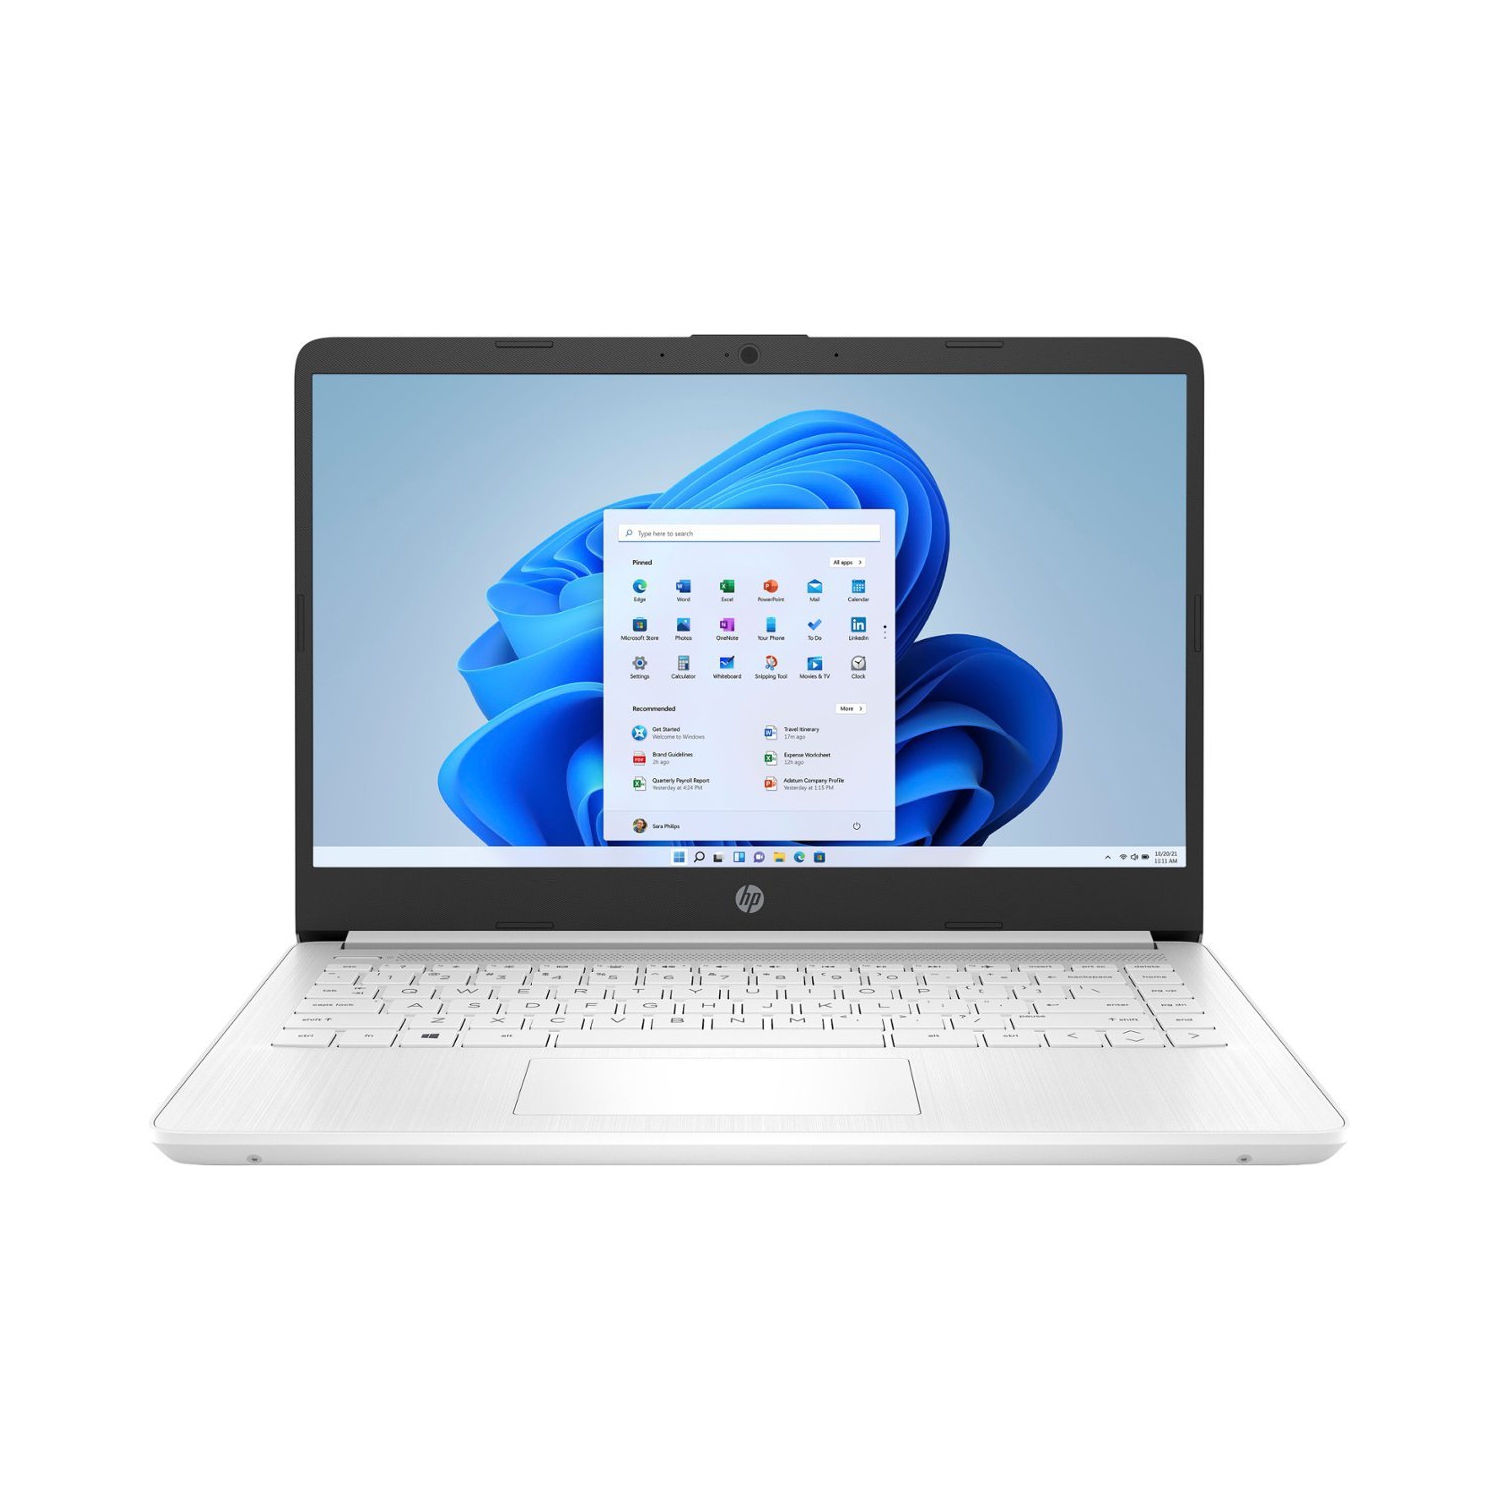 HP Stream 14" Laptop PC - Intel Celeron N4120, 8GB RAM, 64GB eMMC, White, Windows 11 (S Mode), Comes with One Year of Microsoft 365 Subscription